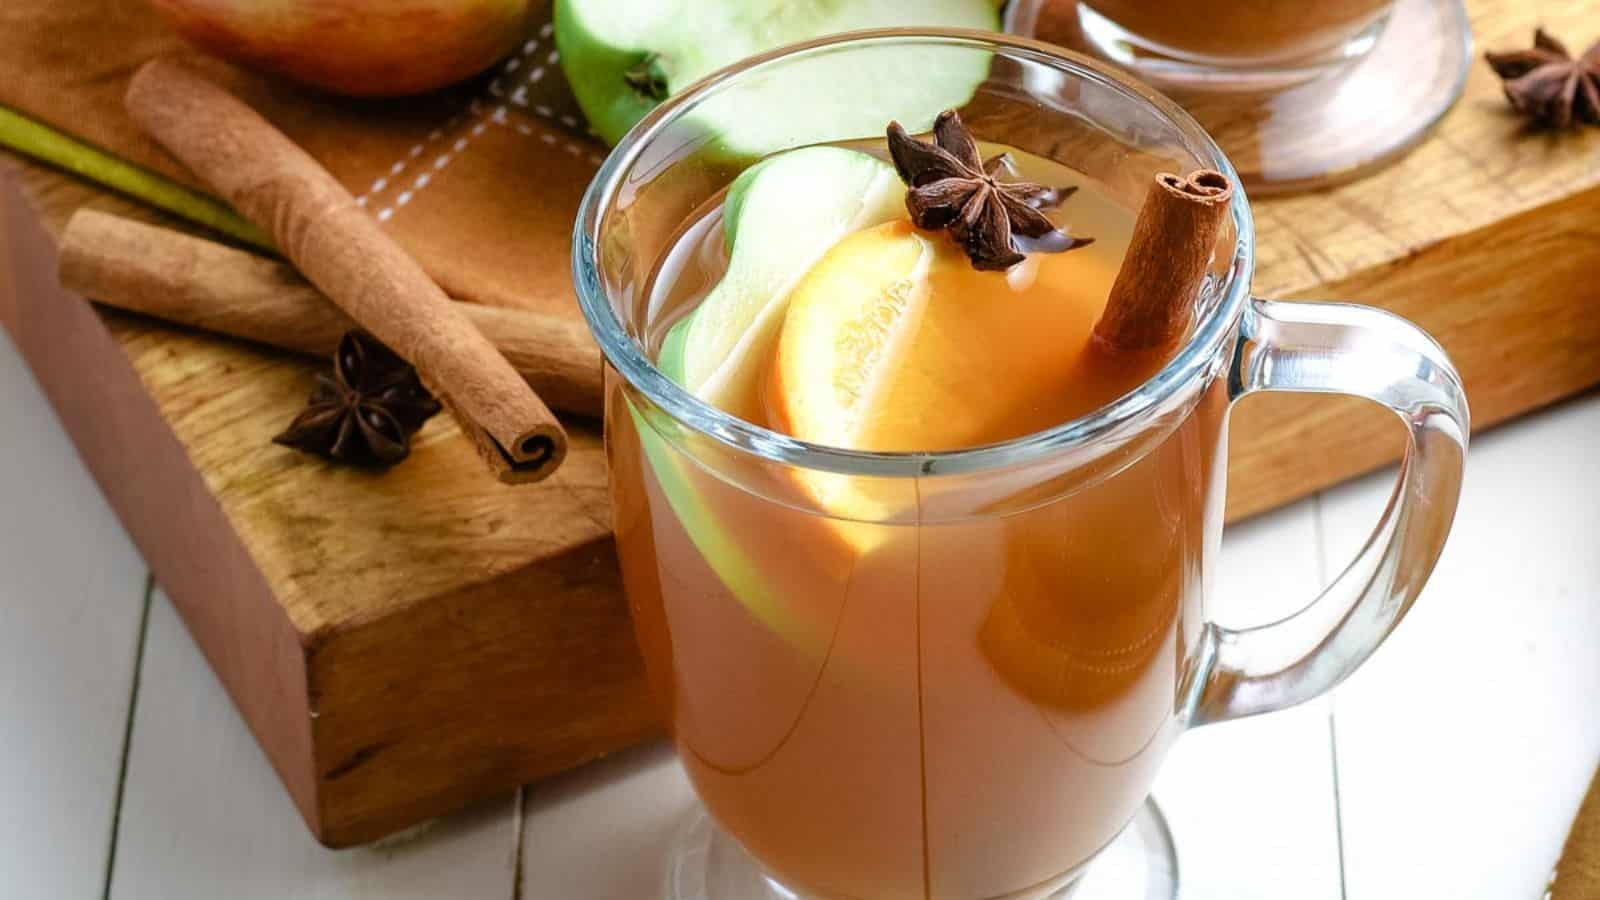 A cup of apple cider with cinnamon sticks and apples.